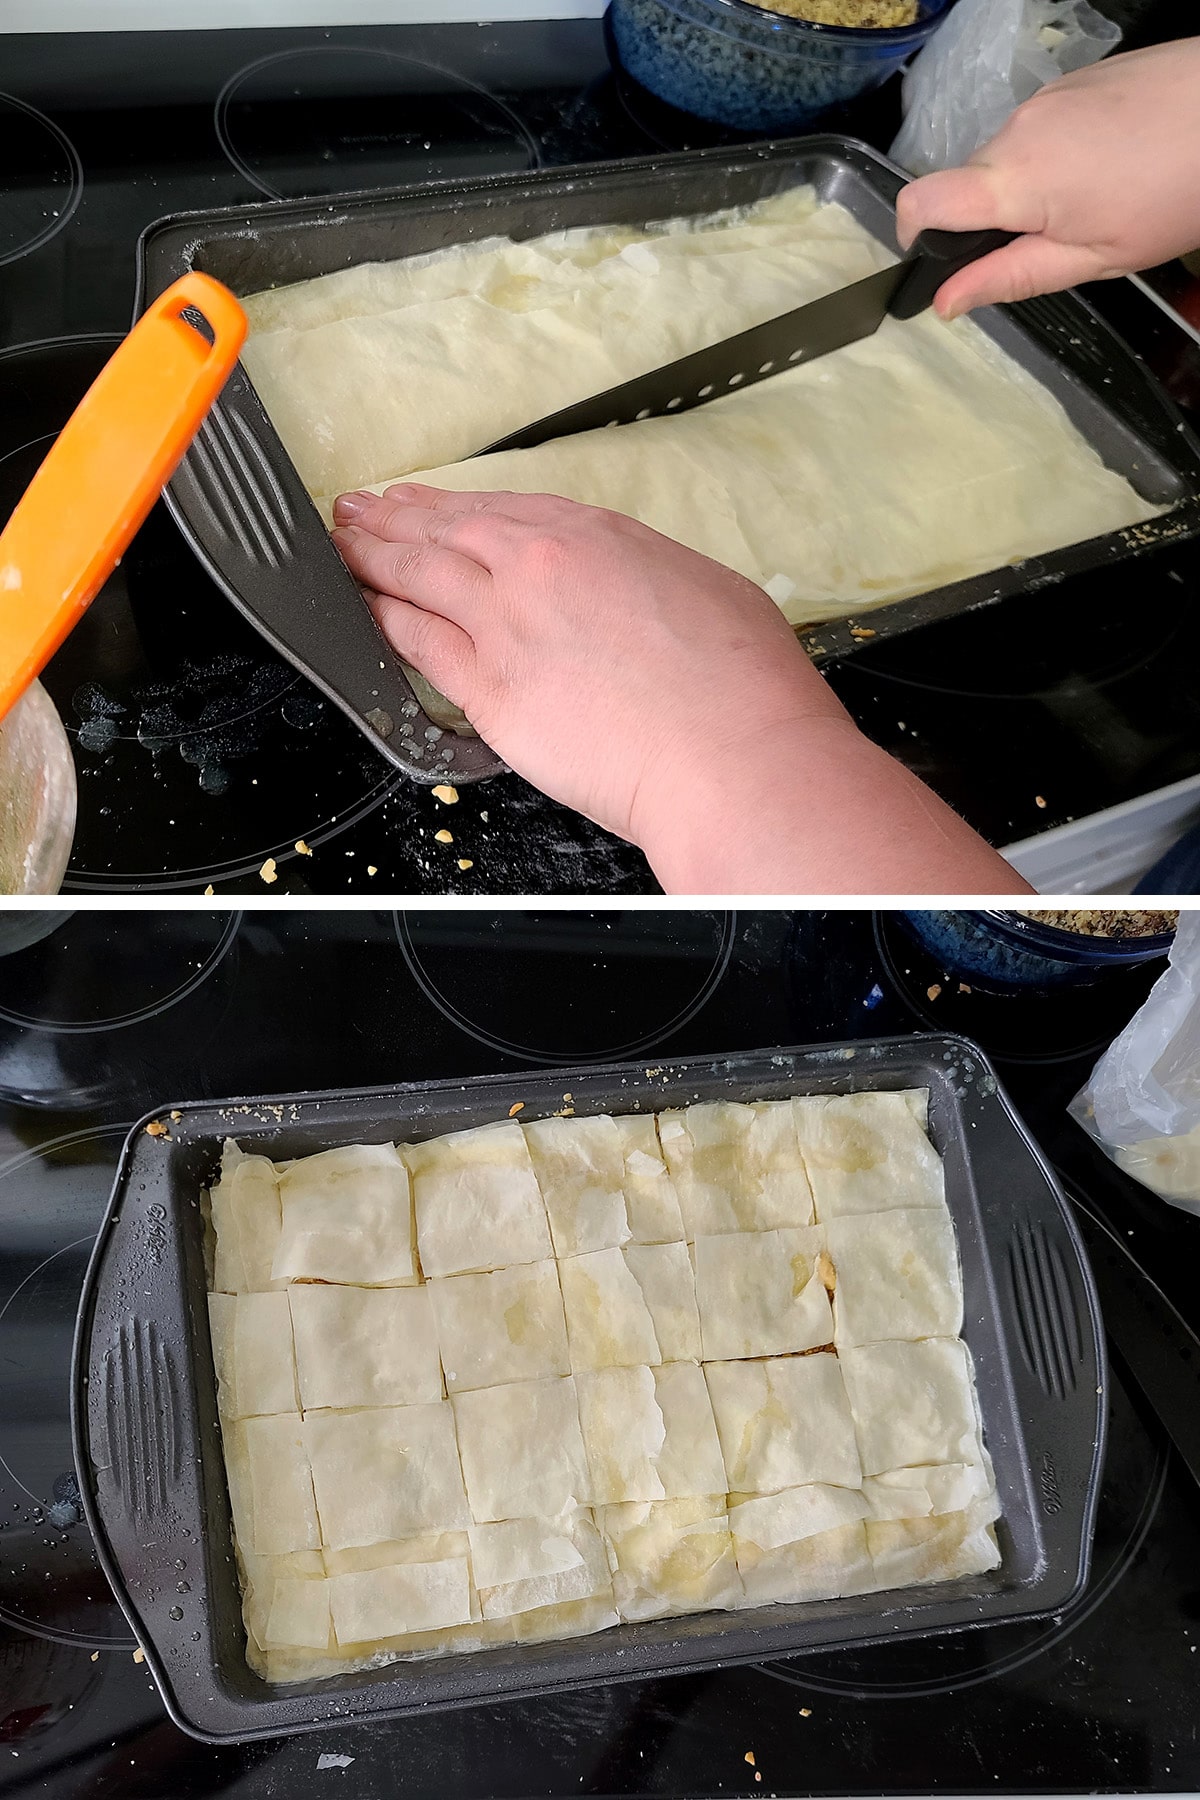 A two part image showing a large knife being used to cut the raw baklava, and the pan of balava cut into squares.